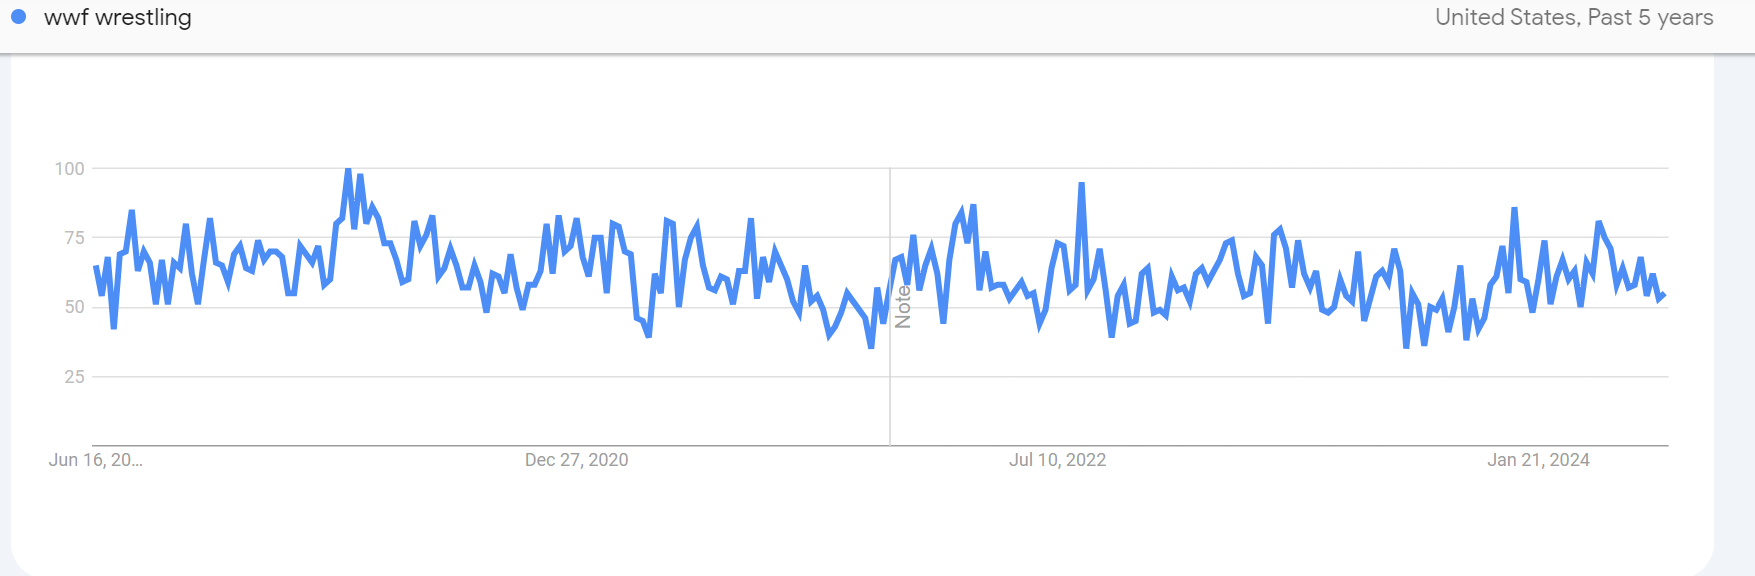 WWF wrestling is a trending topic as per Google Trends Report